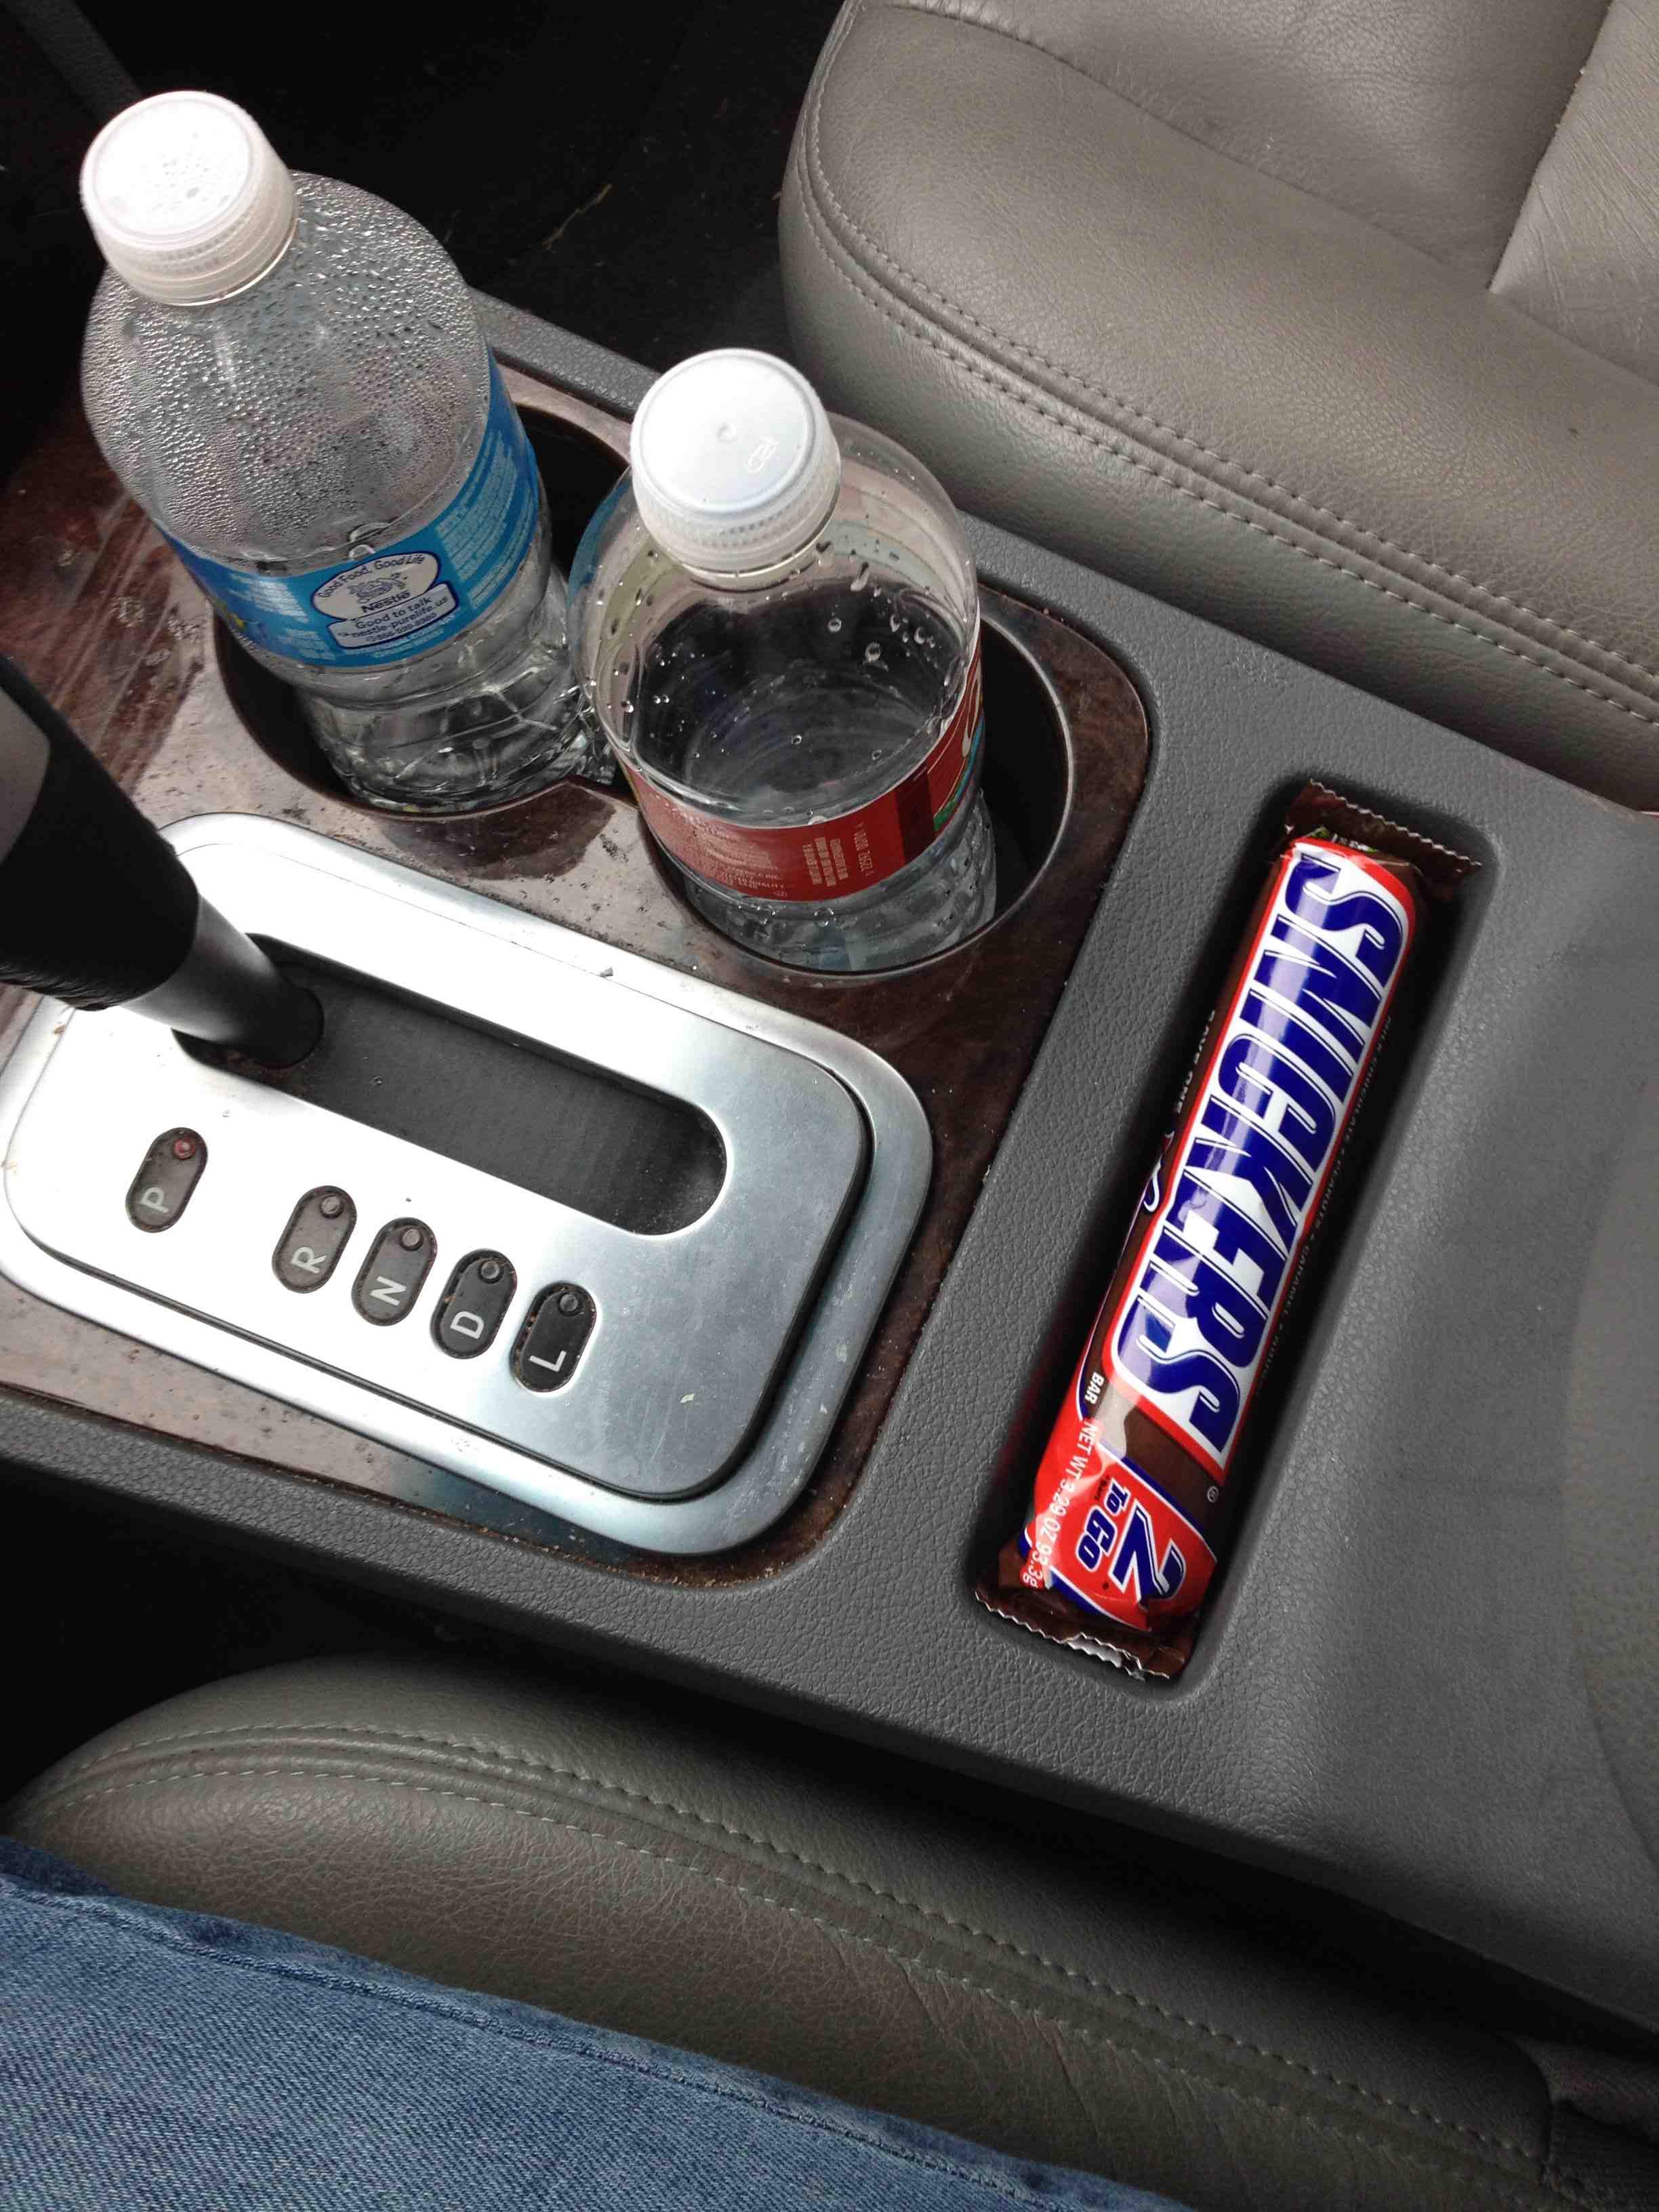 25 Pics That Are Strangely Satisfying To Look At